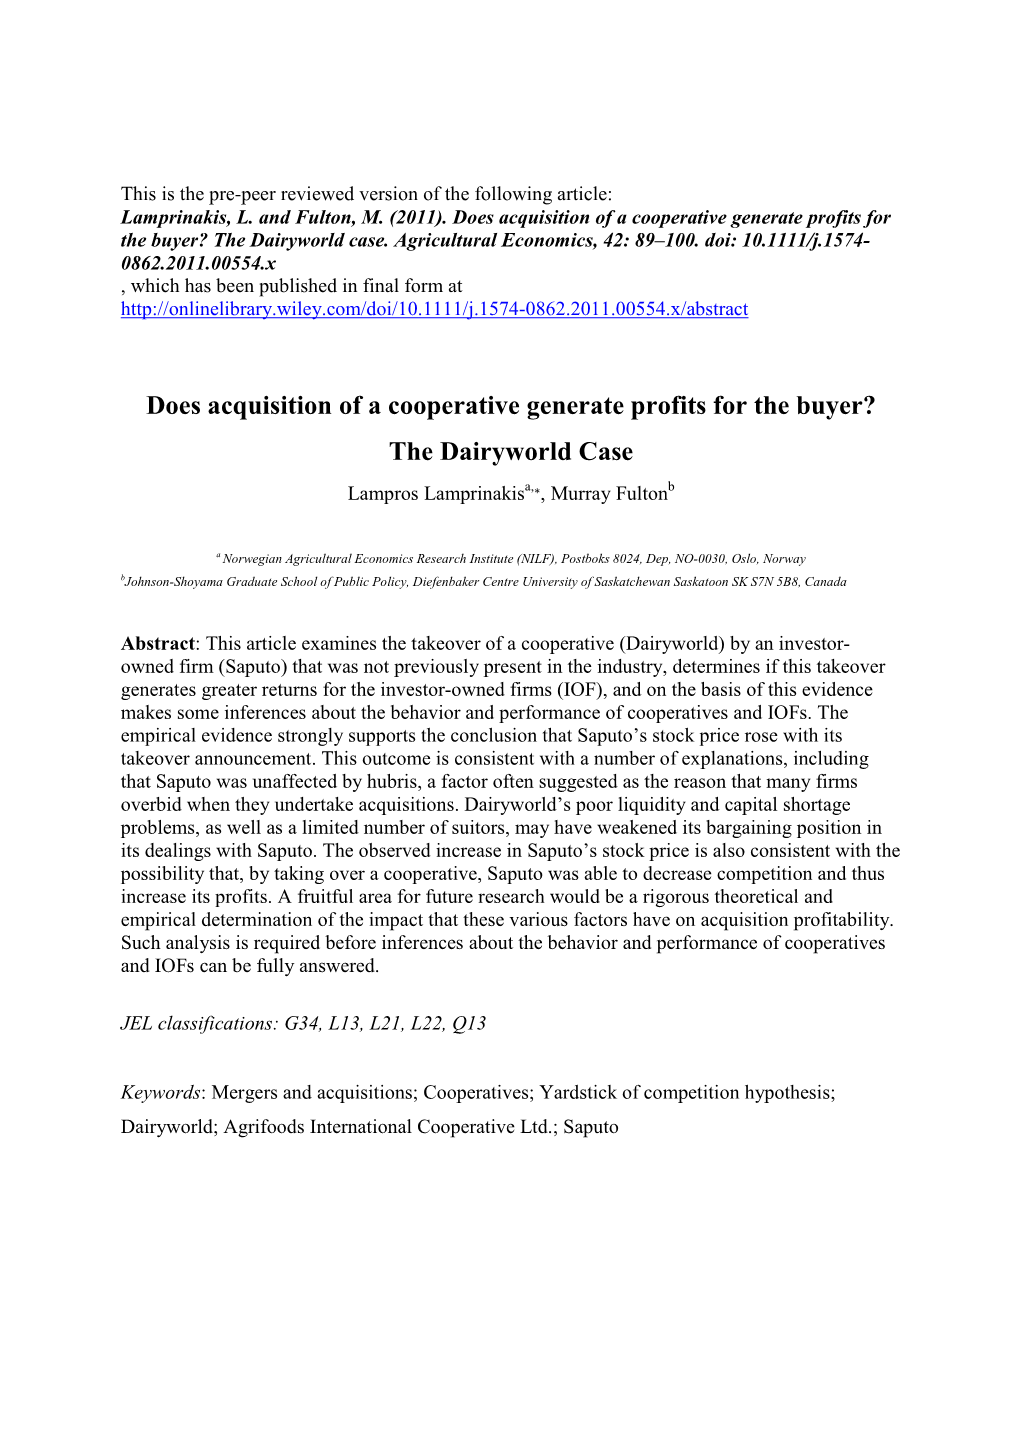 Does Acquisition of a Cooperative Generate Profits for the Buyer? the Dairyworld Case